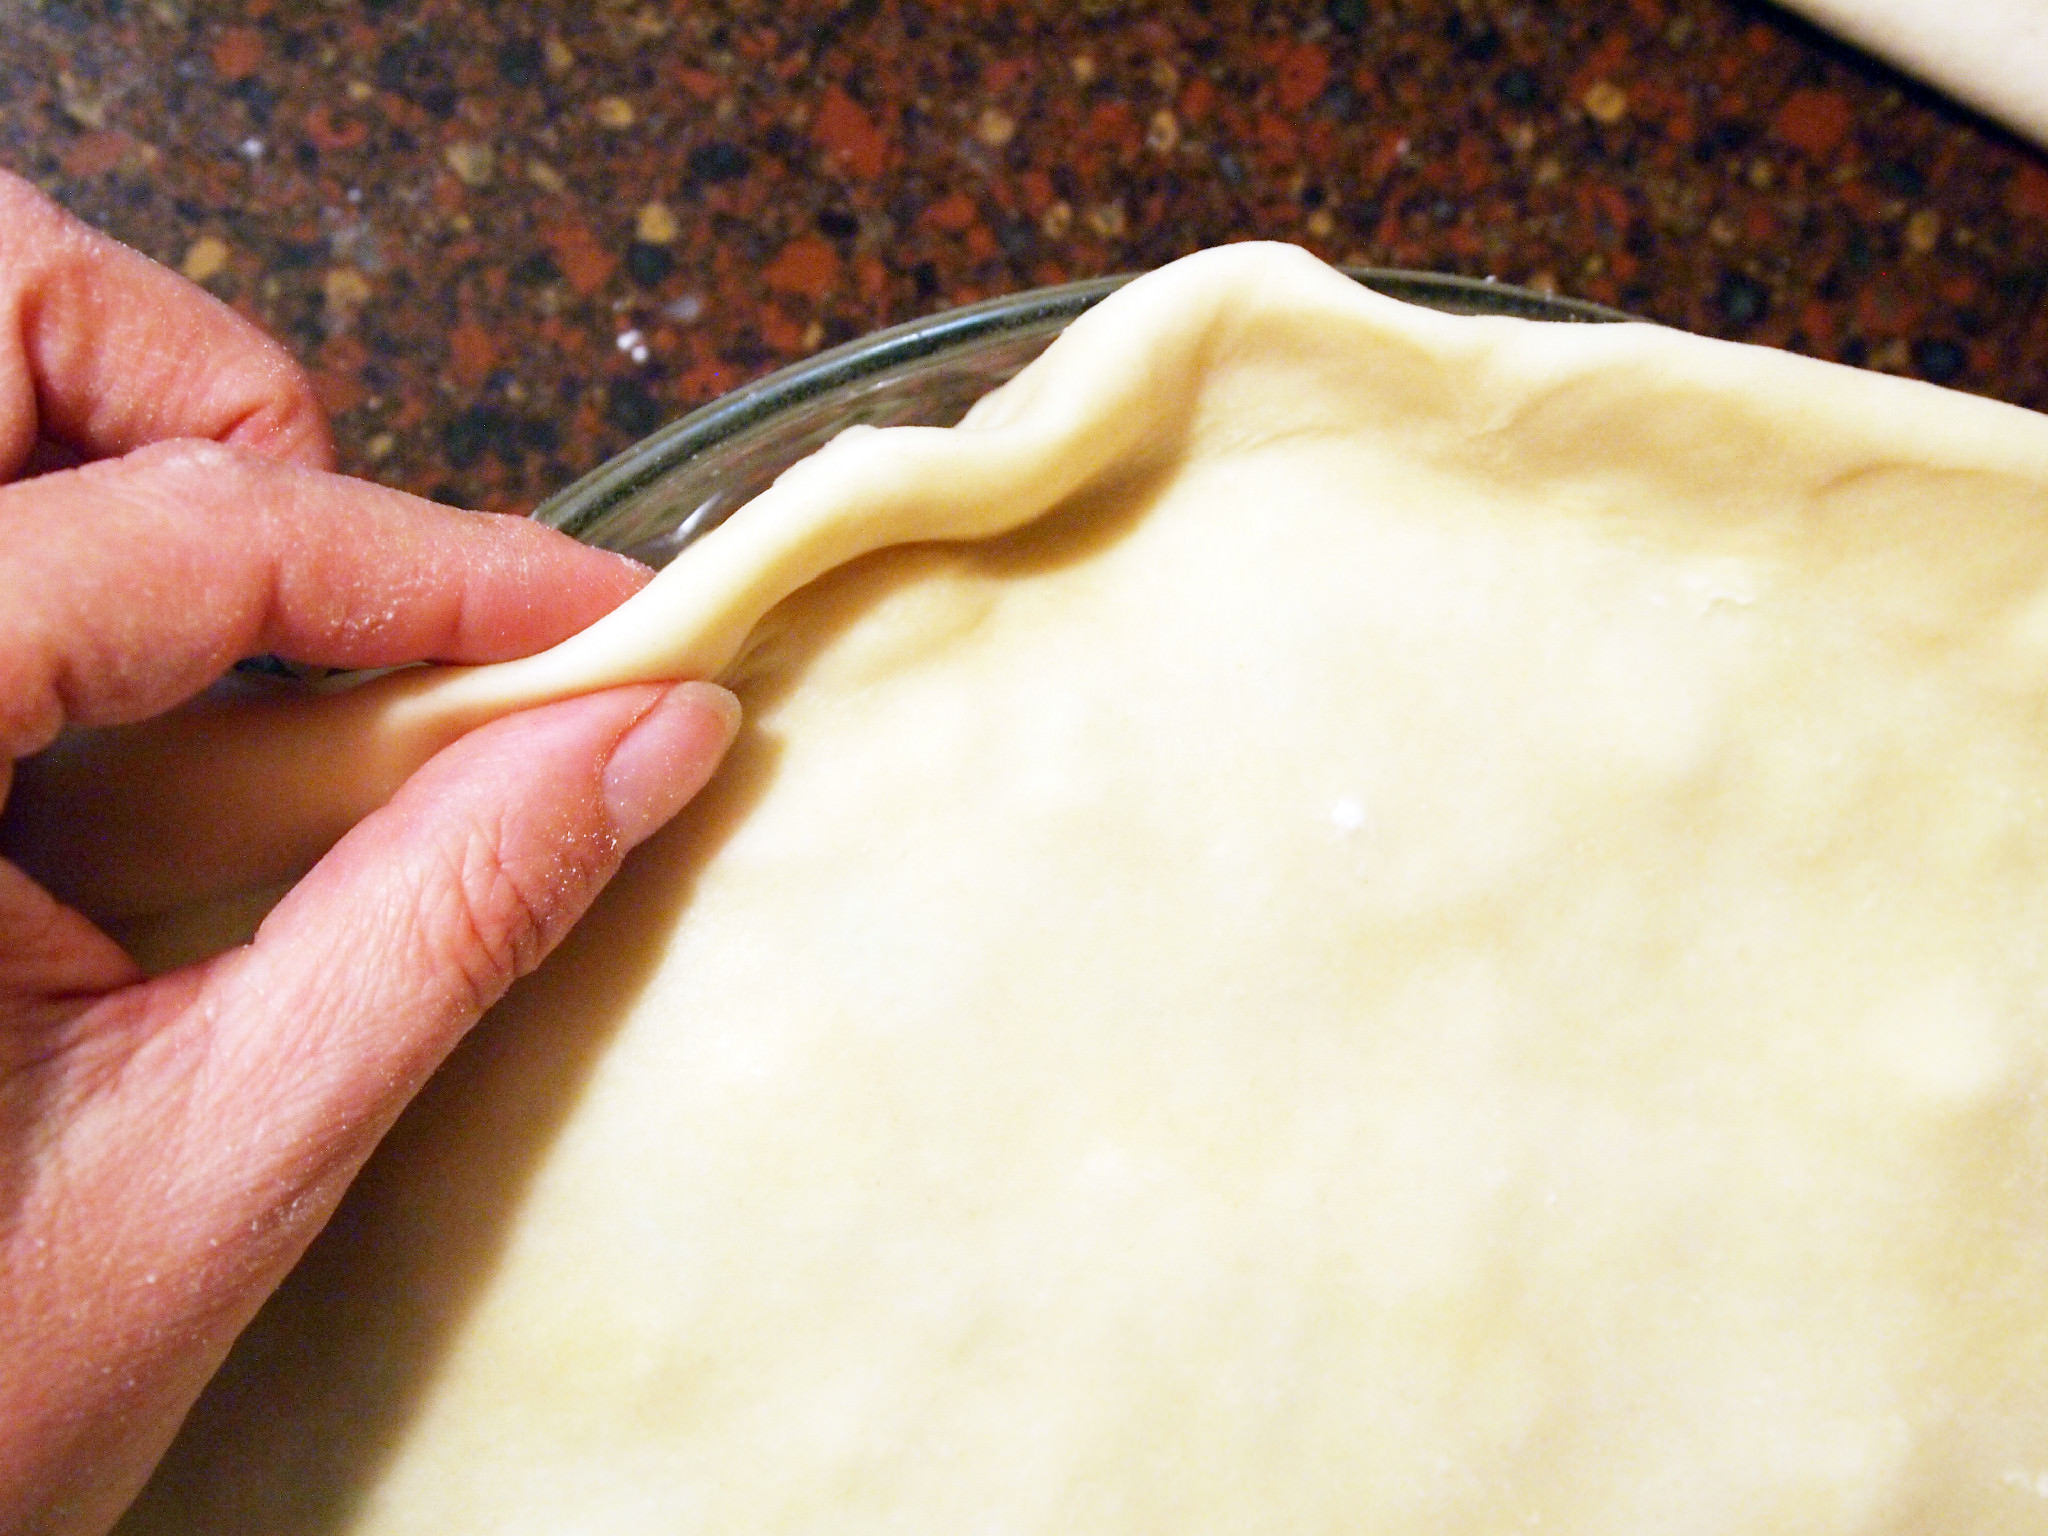 forming a pie crust requires light fingers